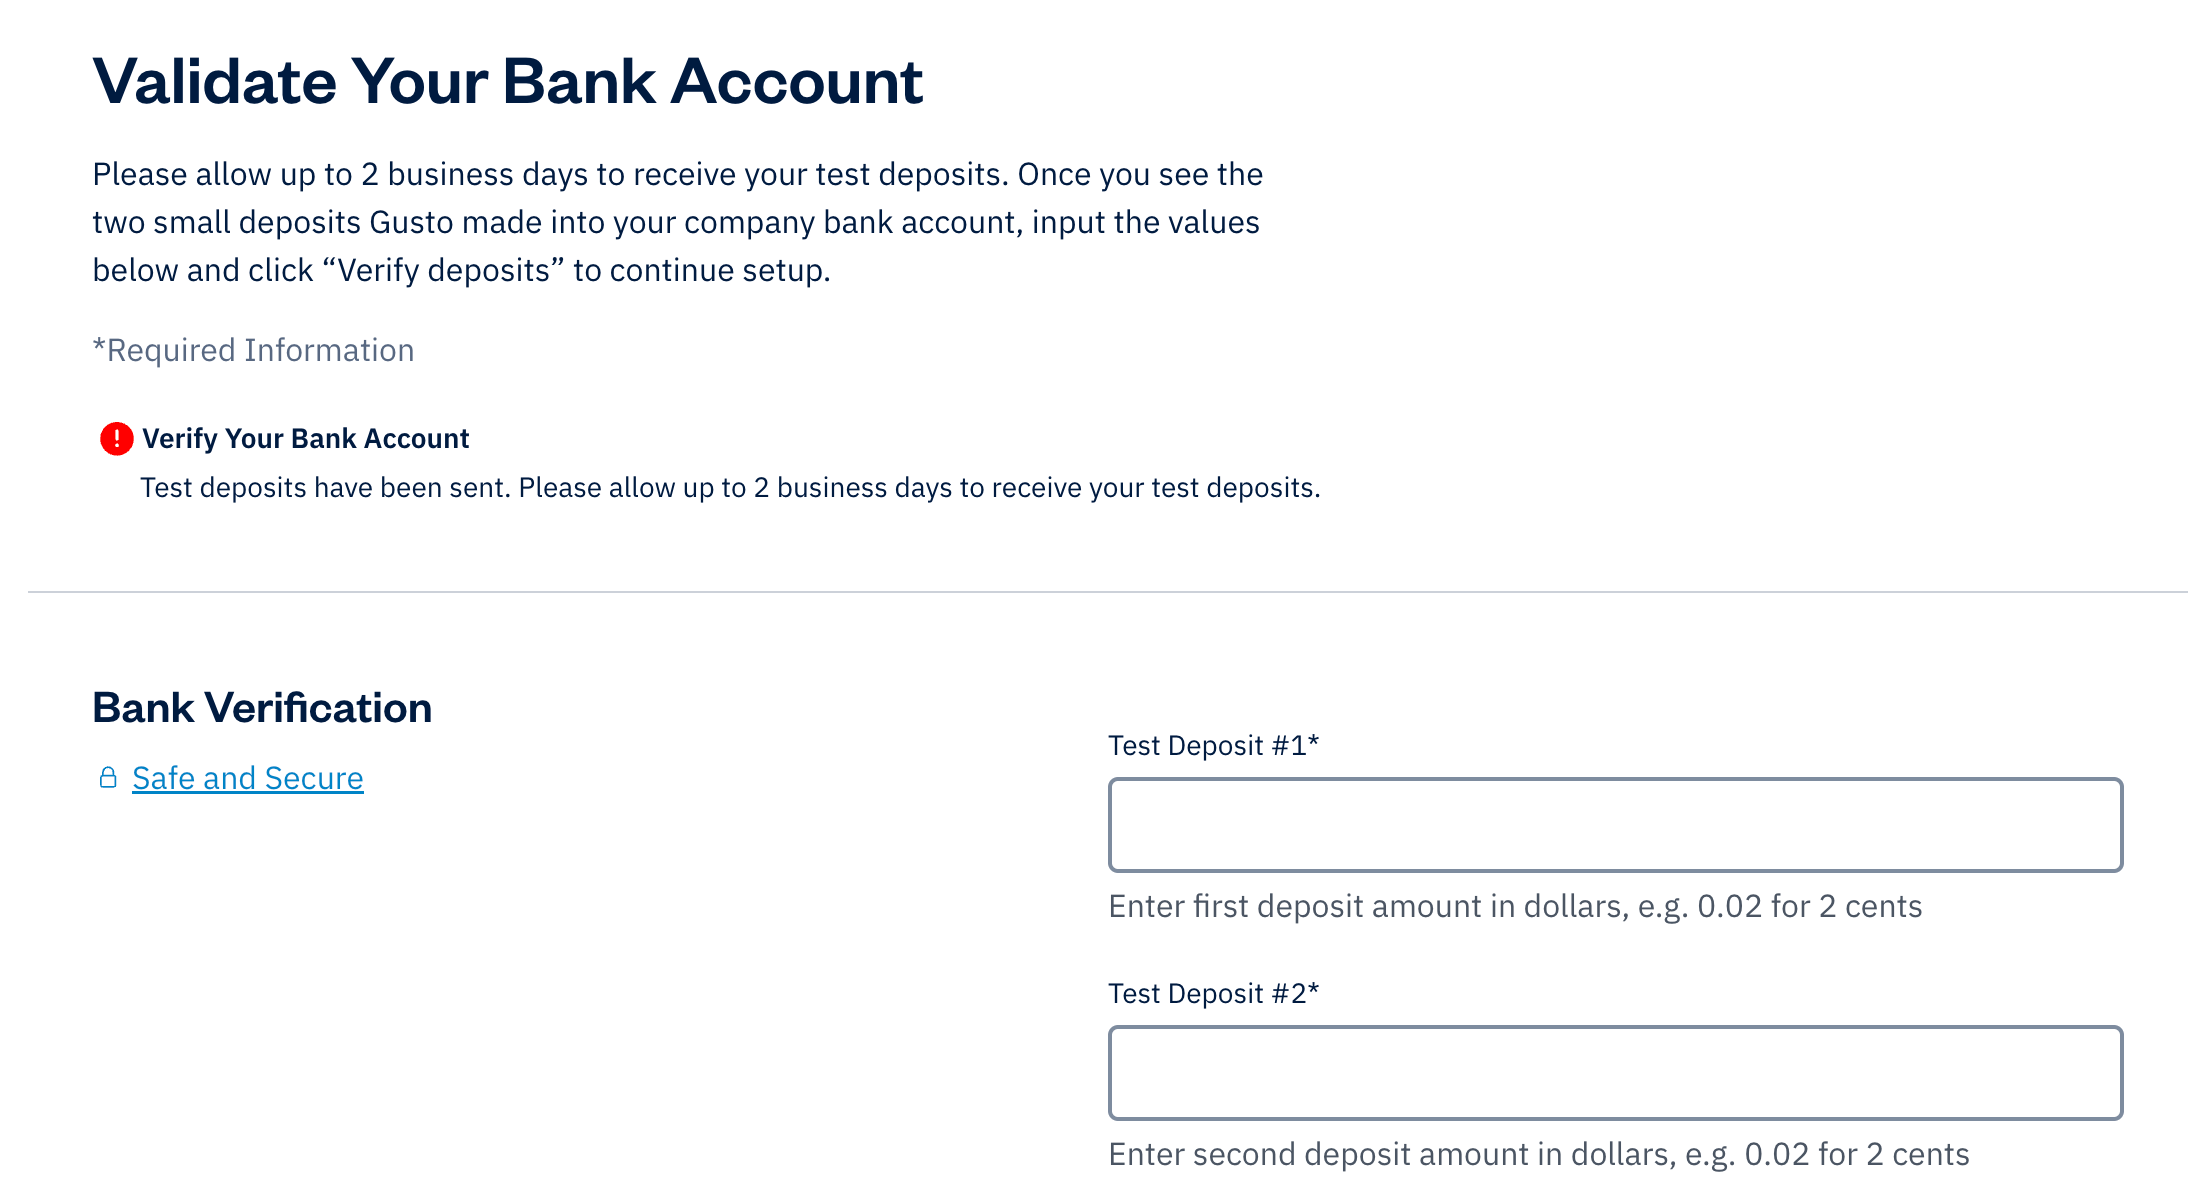 Validate your bank account section with fields to fill out for deposit amounts.